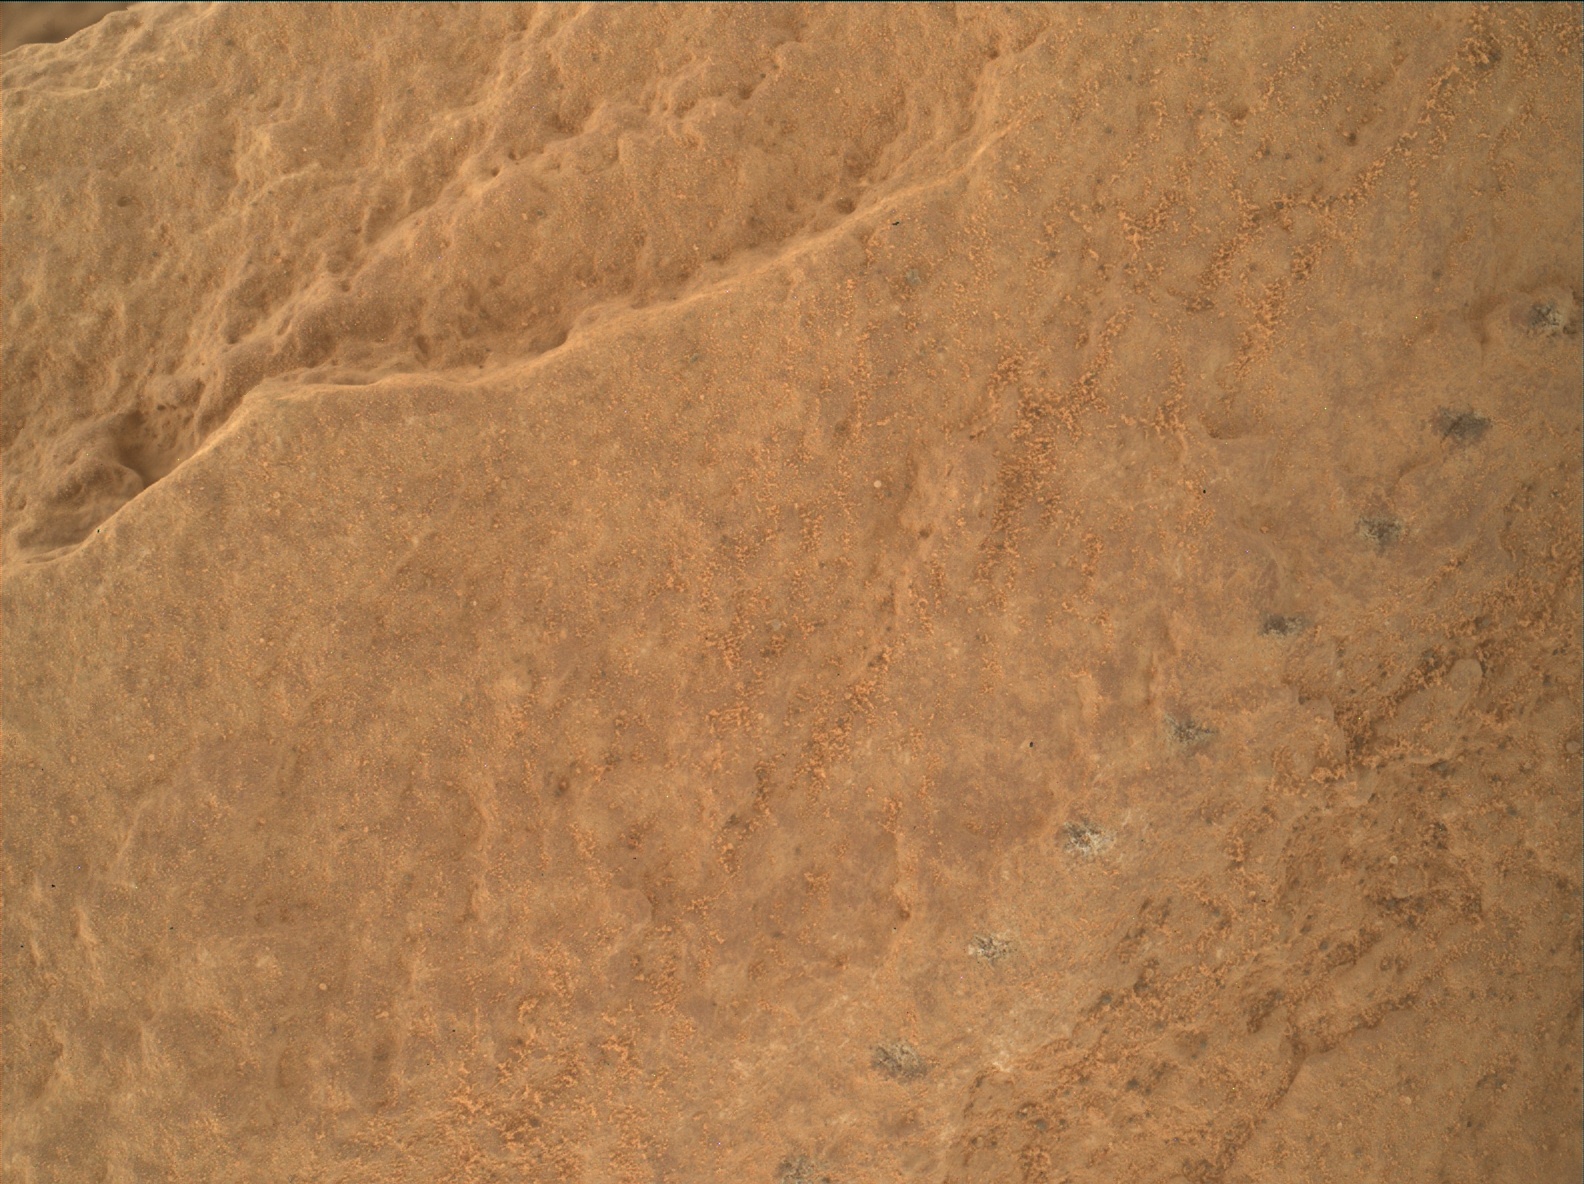 Nasa's Mars rover Curiosity acquired this image using its Mars Hand Lens Imager (MAHLI) on Sol 2579